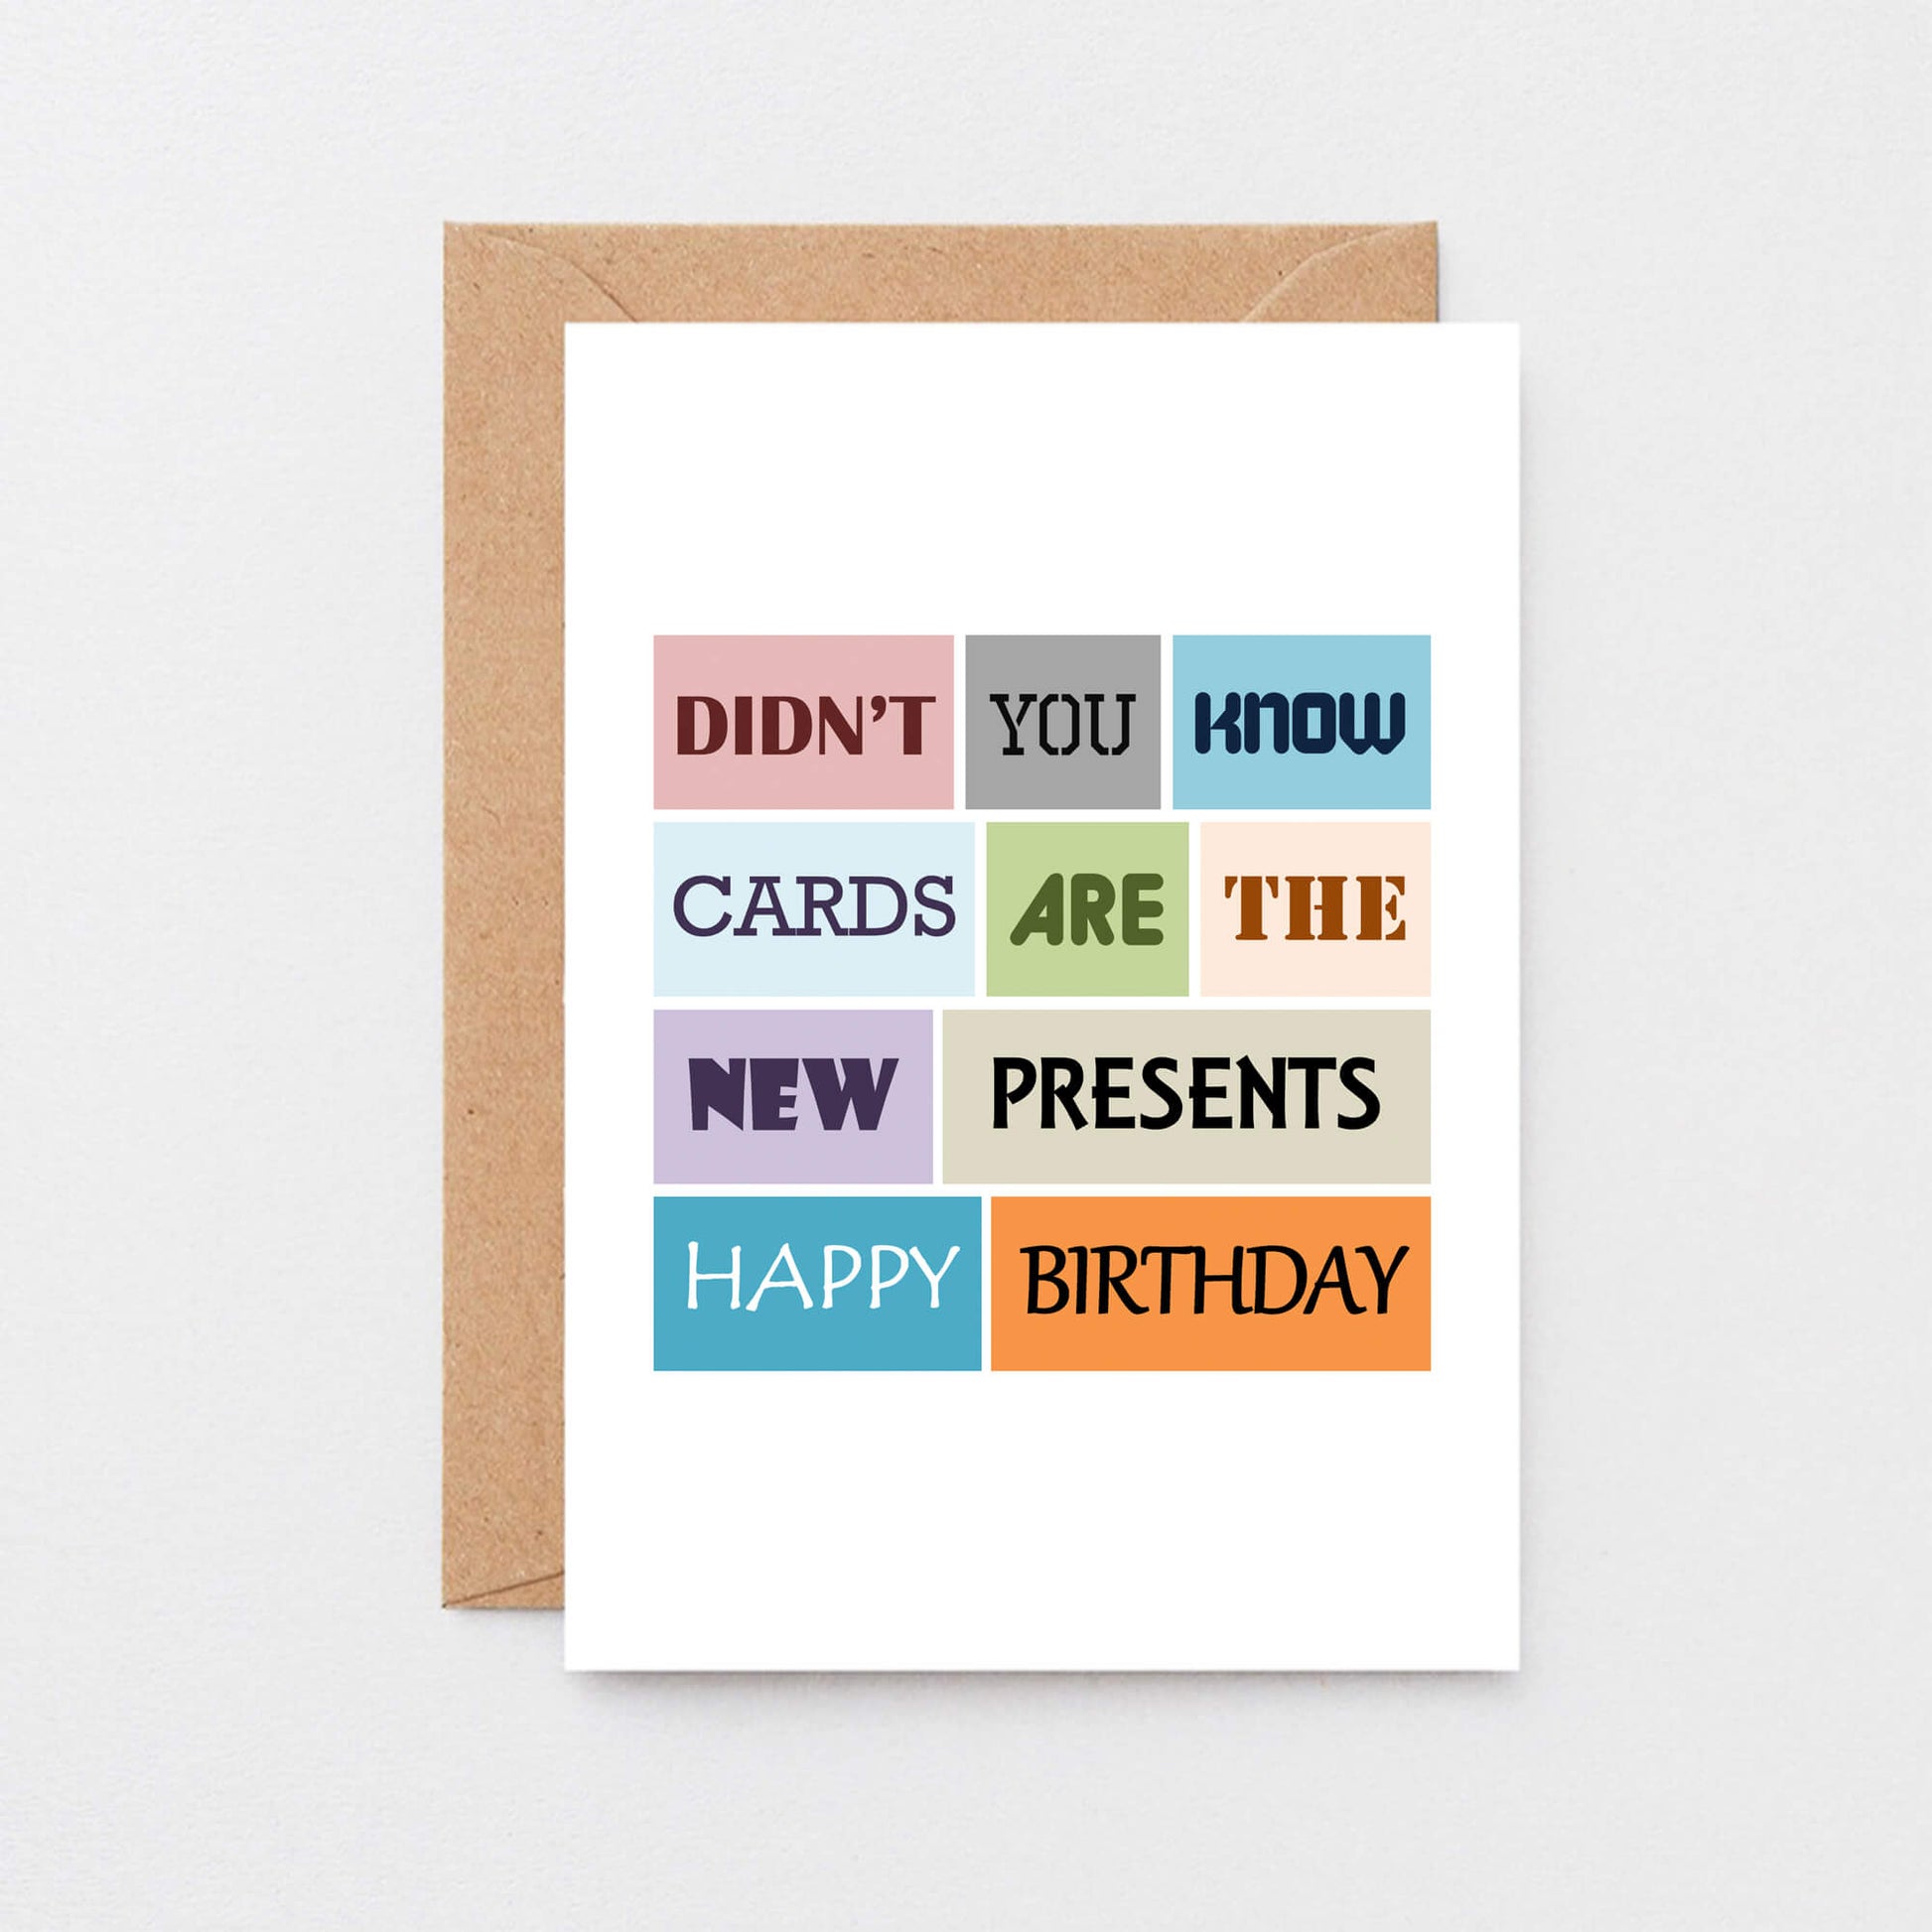 Birthday Card by SixElevenCreations. Reads Didn't you know cards are the new presents. Happy birthday. Product Code SE0023A6